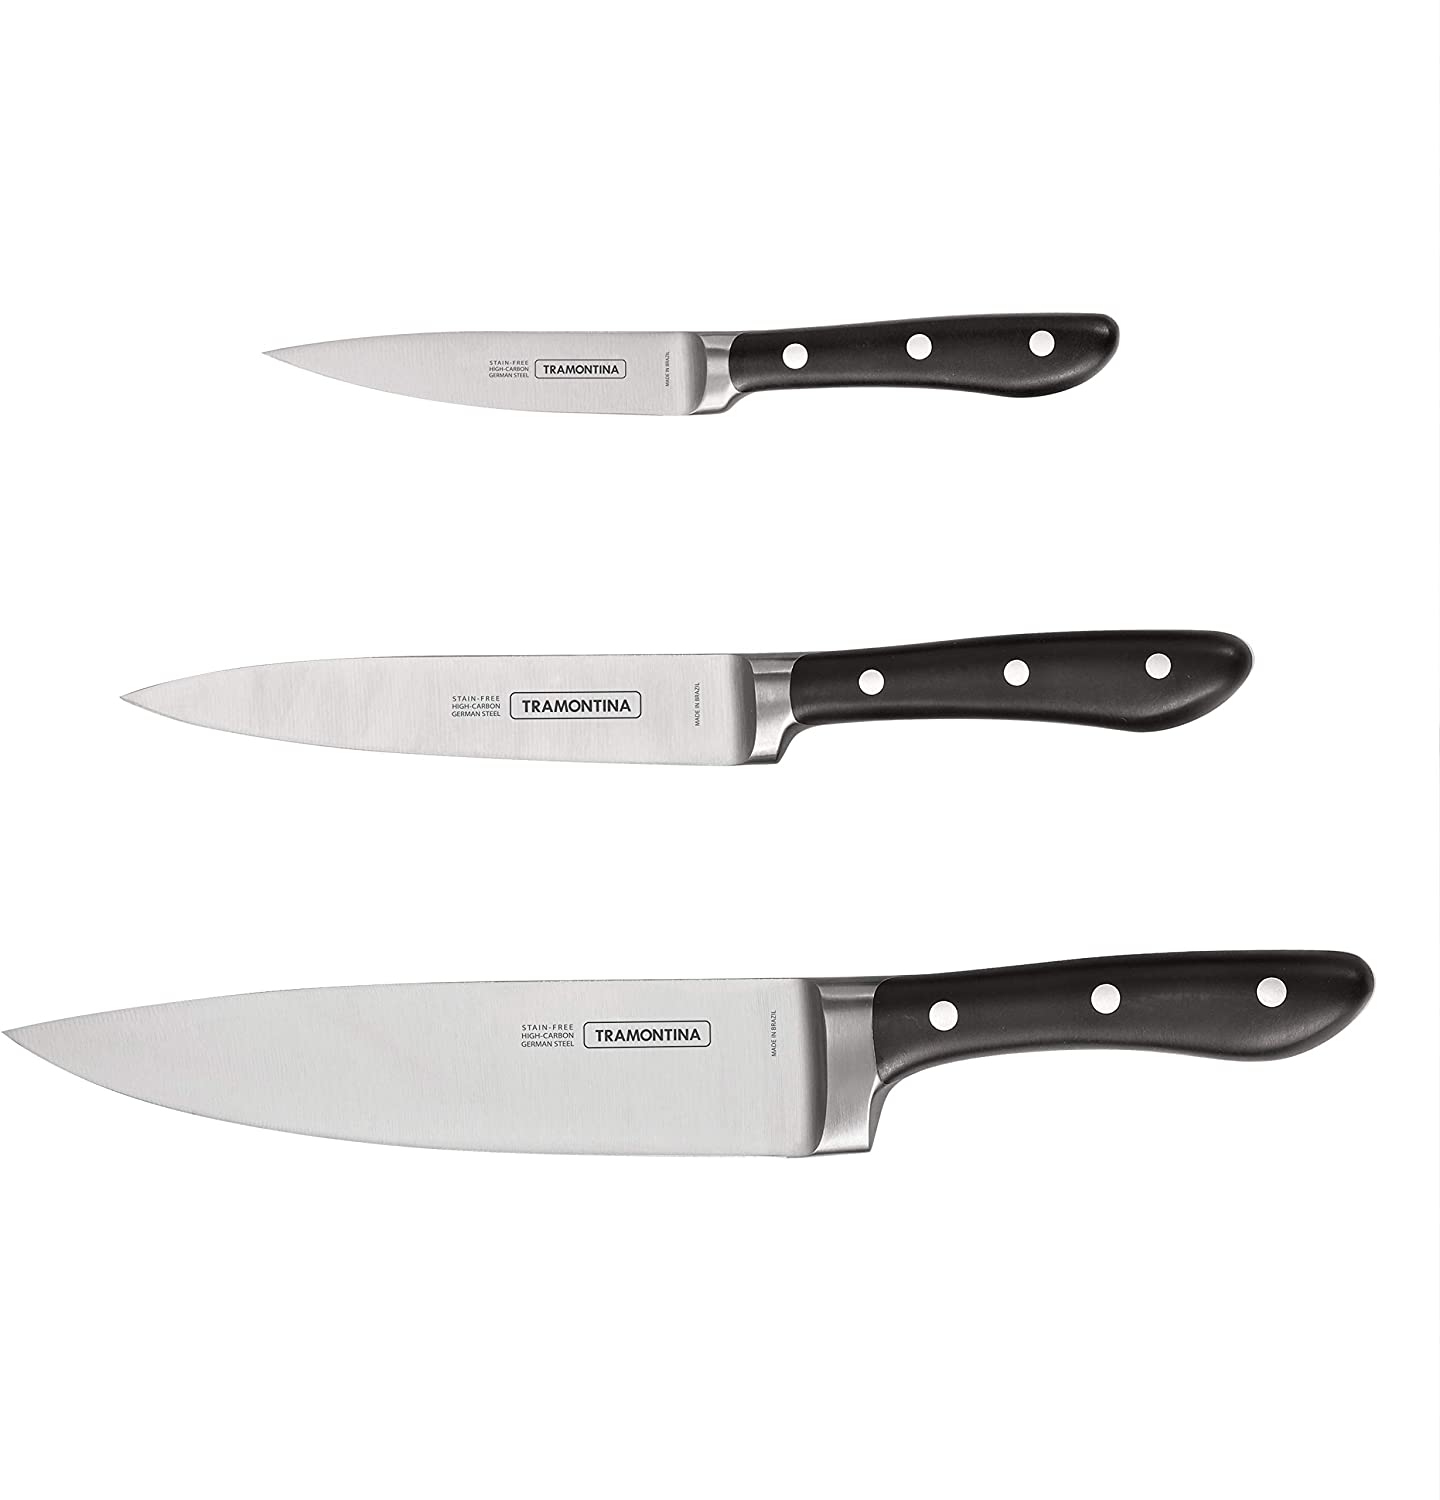 Tramontina 3-Piece Forged Kitchen Knife Set (4" Paring + 6" Utility + 8" Chef) $23.35 + Free S&H w/ Prime or $25+